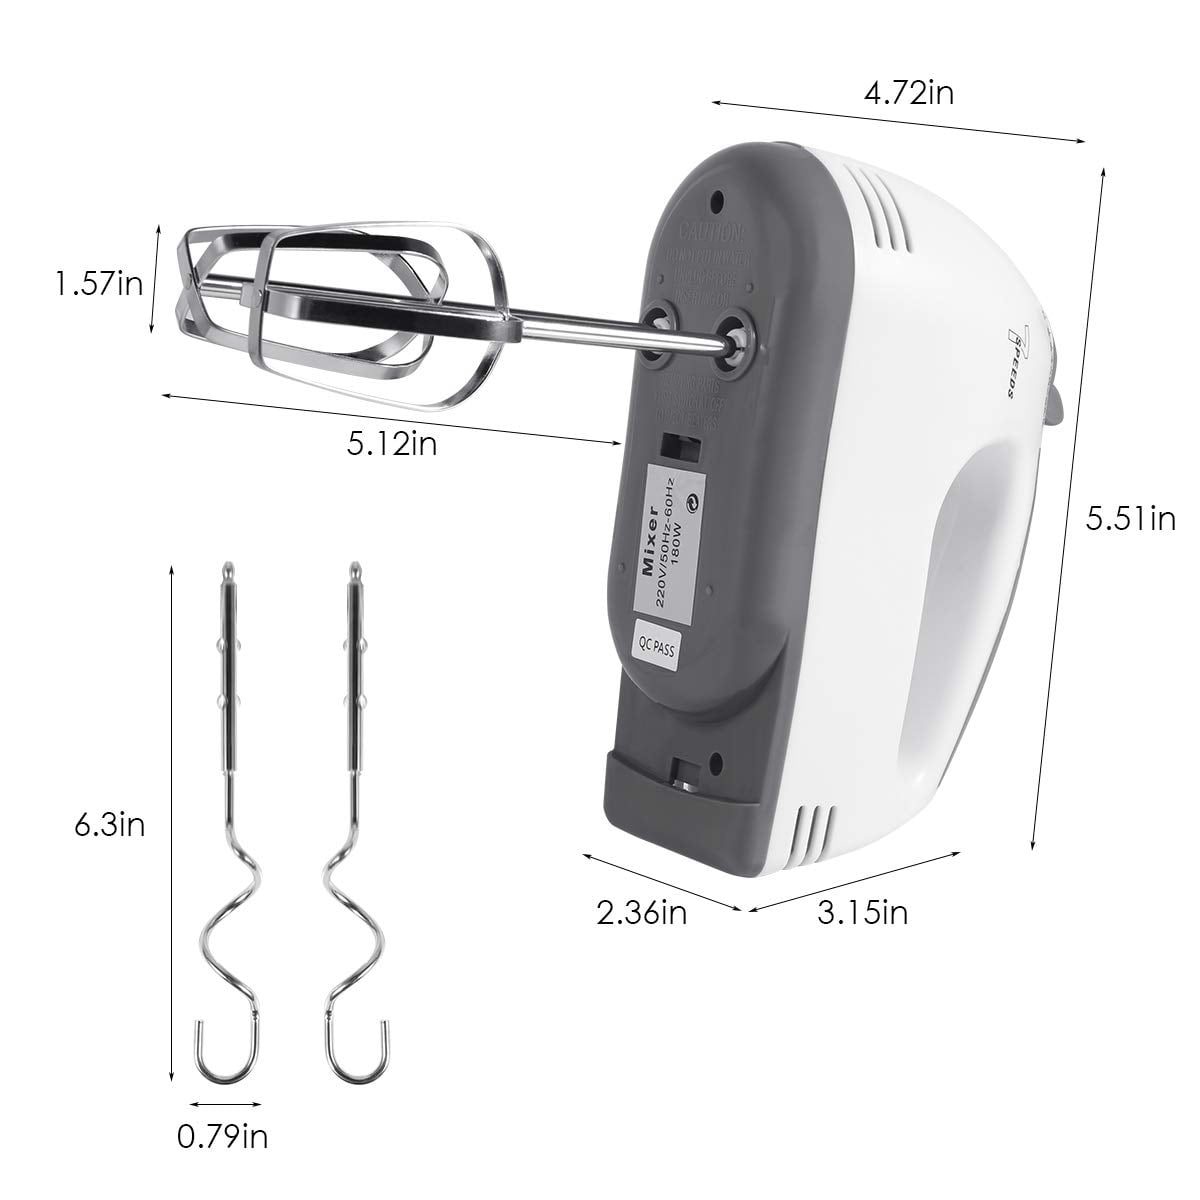 Hand Mixer Electric, 7 Speeds Selection Portable Handheld Kitchen Whisk, Lightweight Powerful Handheld Electric Mixer Stainless Steel Egg Whisk with 2